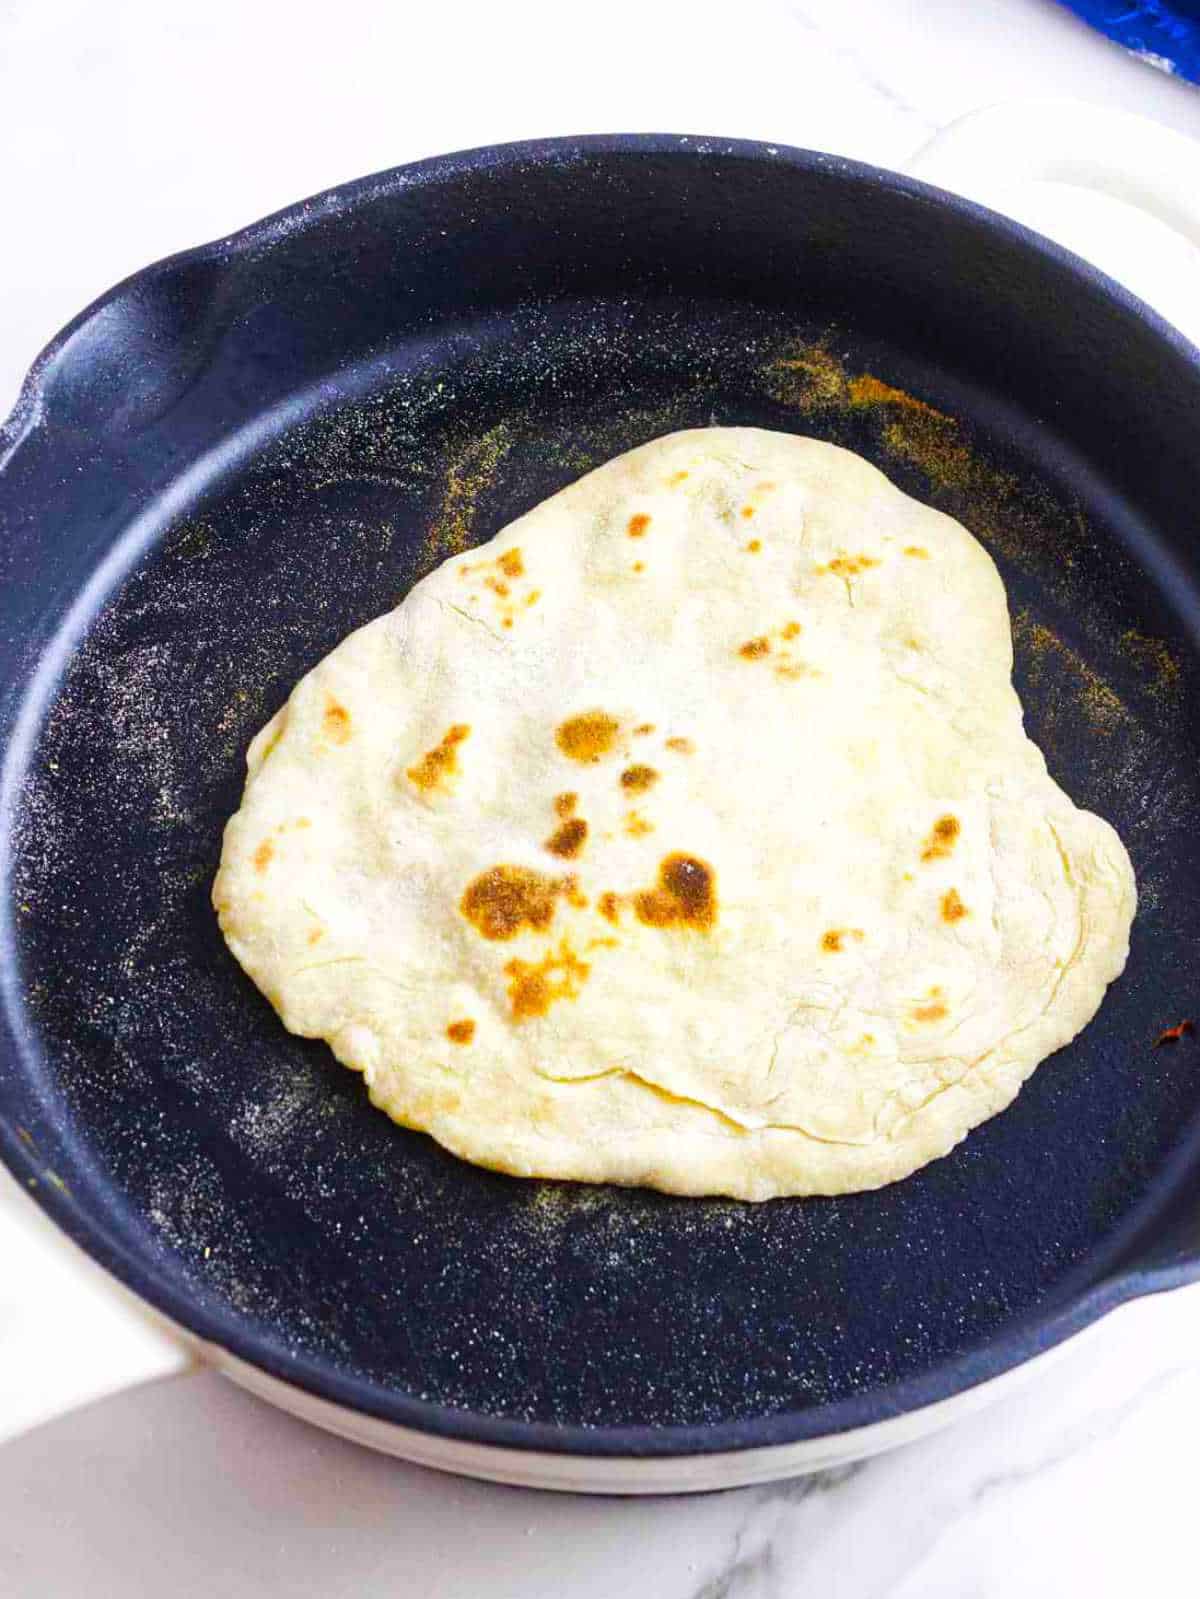 frying naan bread in a hot skillet.